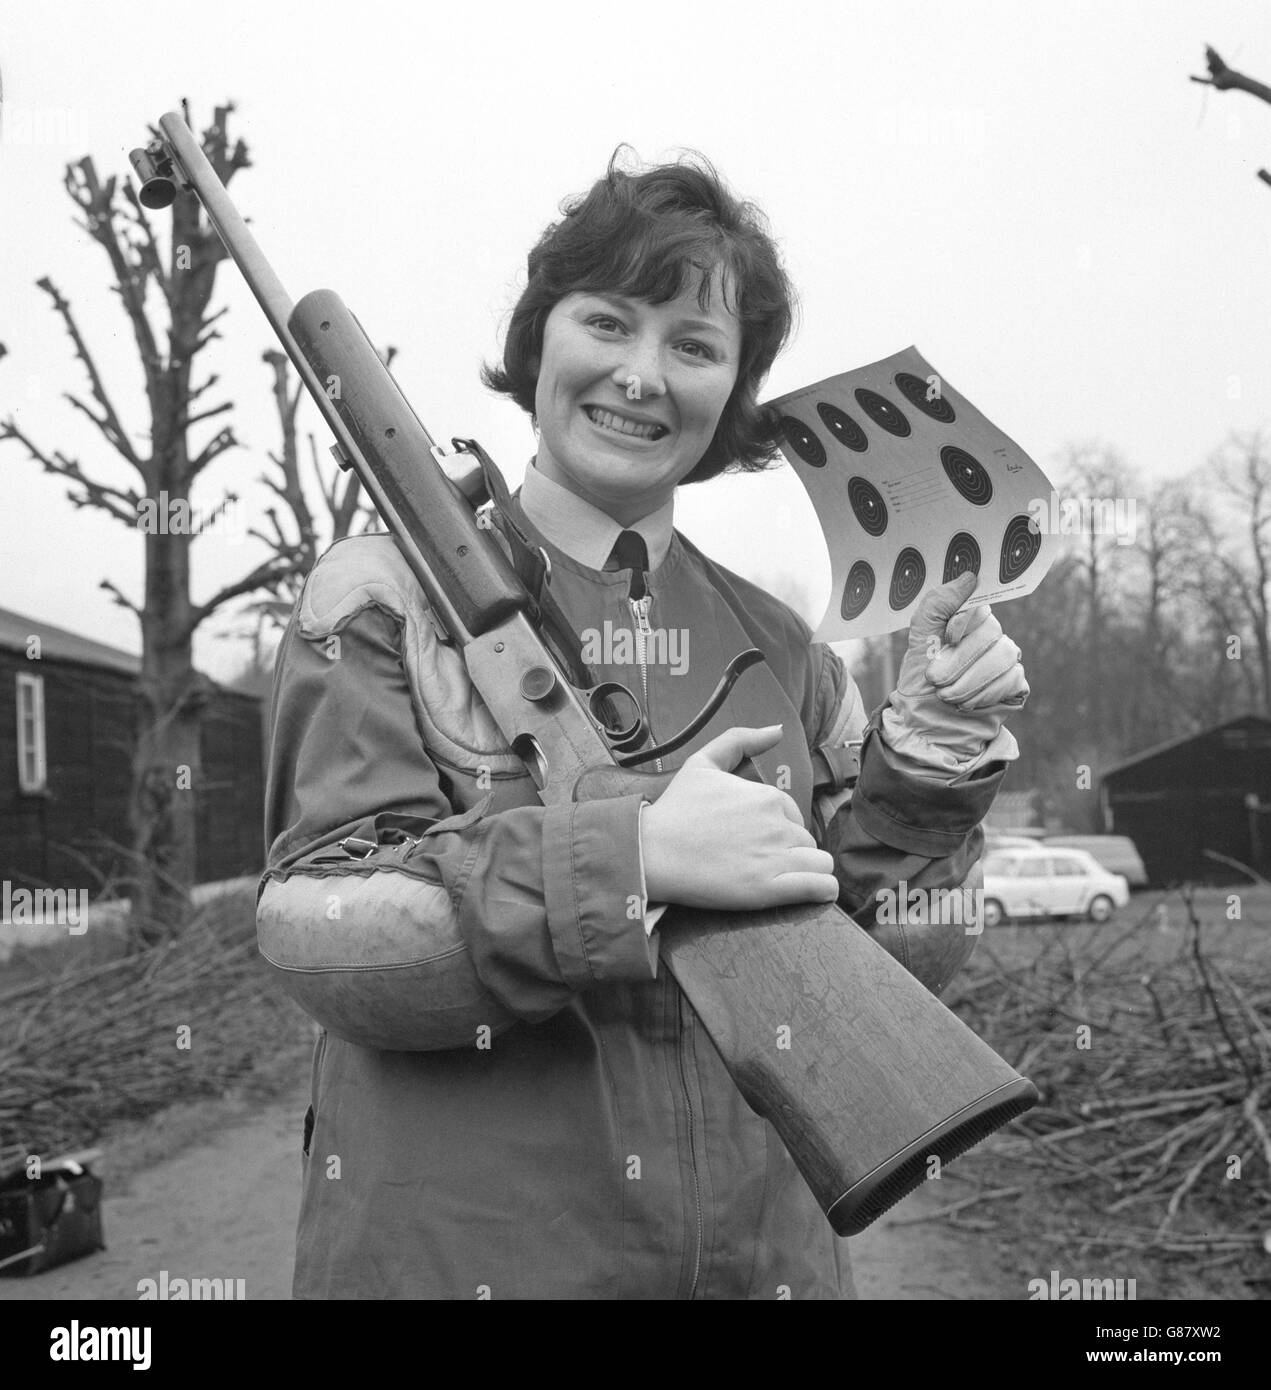 Pilot Officer Linda McGowan of Liverpool holds up a target card on the rifle range at RAF Uxbridge, Middlesex. She is one of the 16 top shots of the Women's Royal Air Force, from whom a team of ten will be chosen for an attempt to regain the Women's Inter-Services Small-bore Rifle Championship. Stock Photo